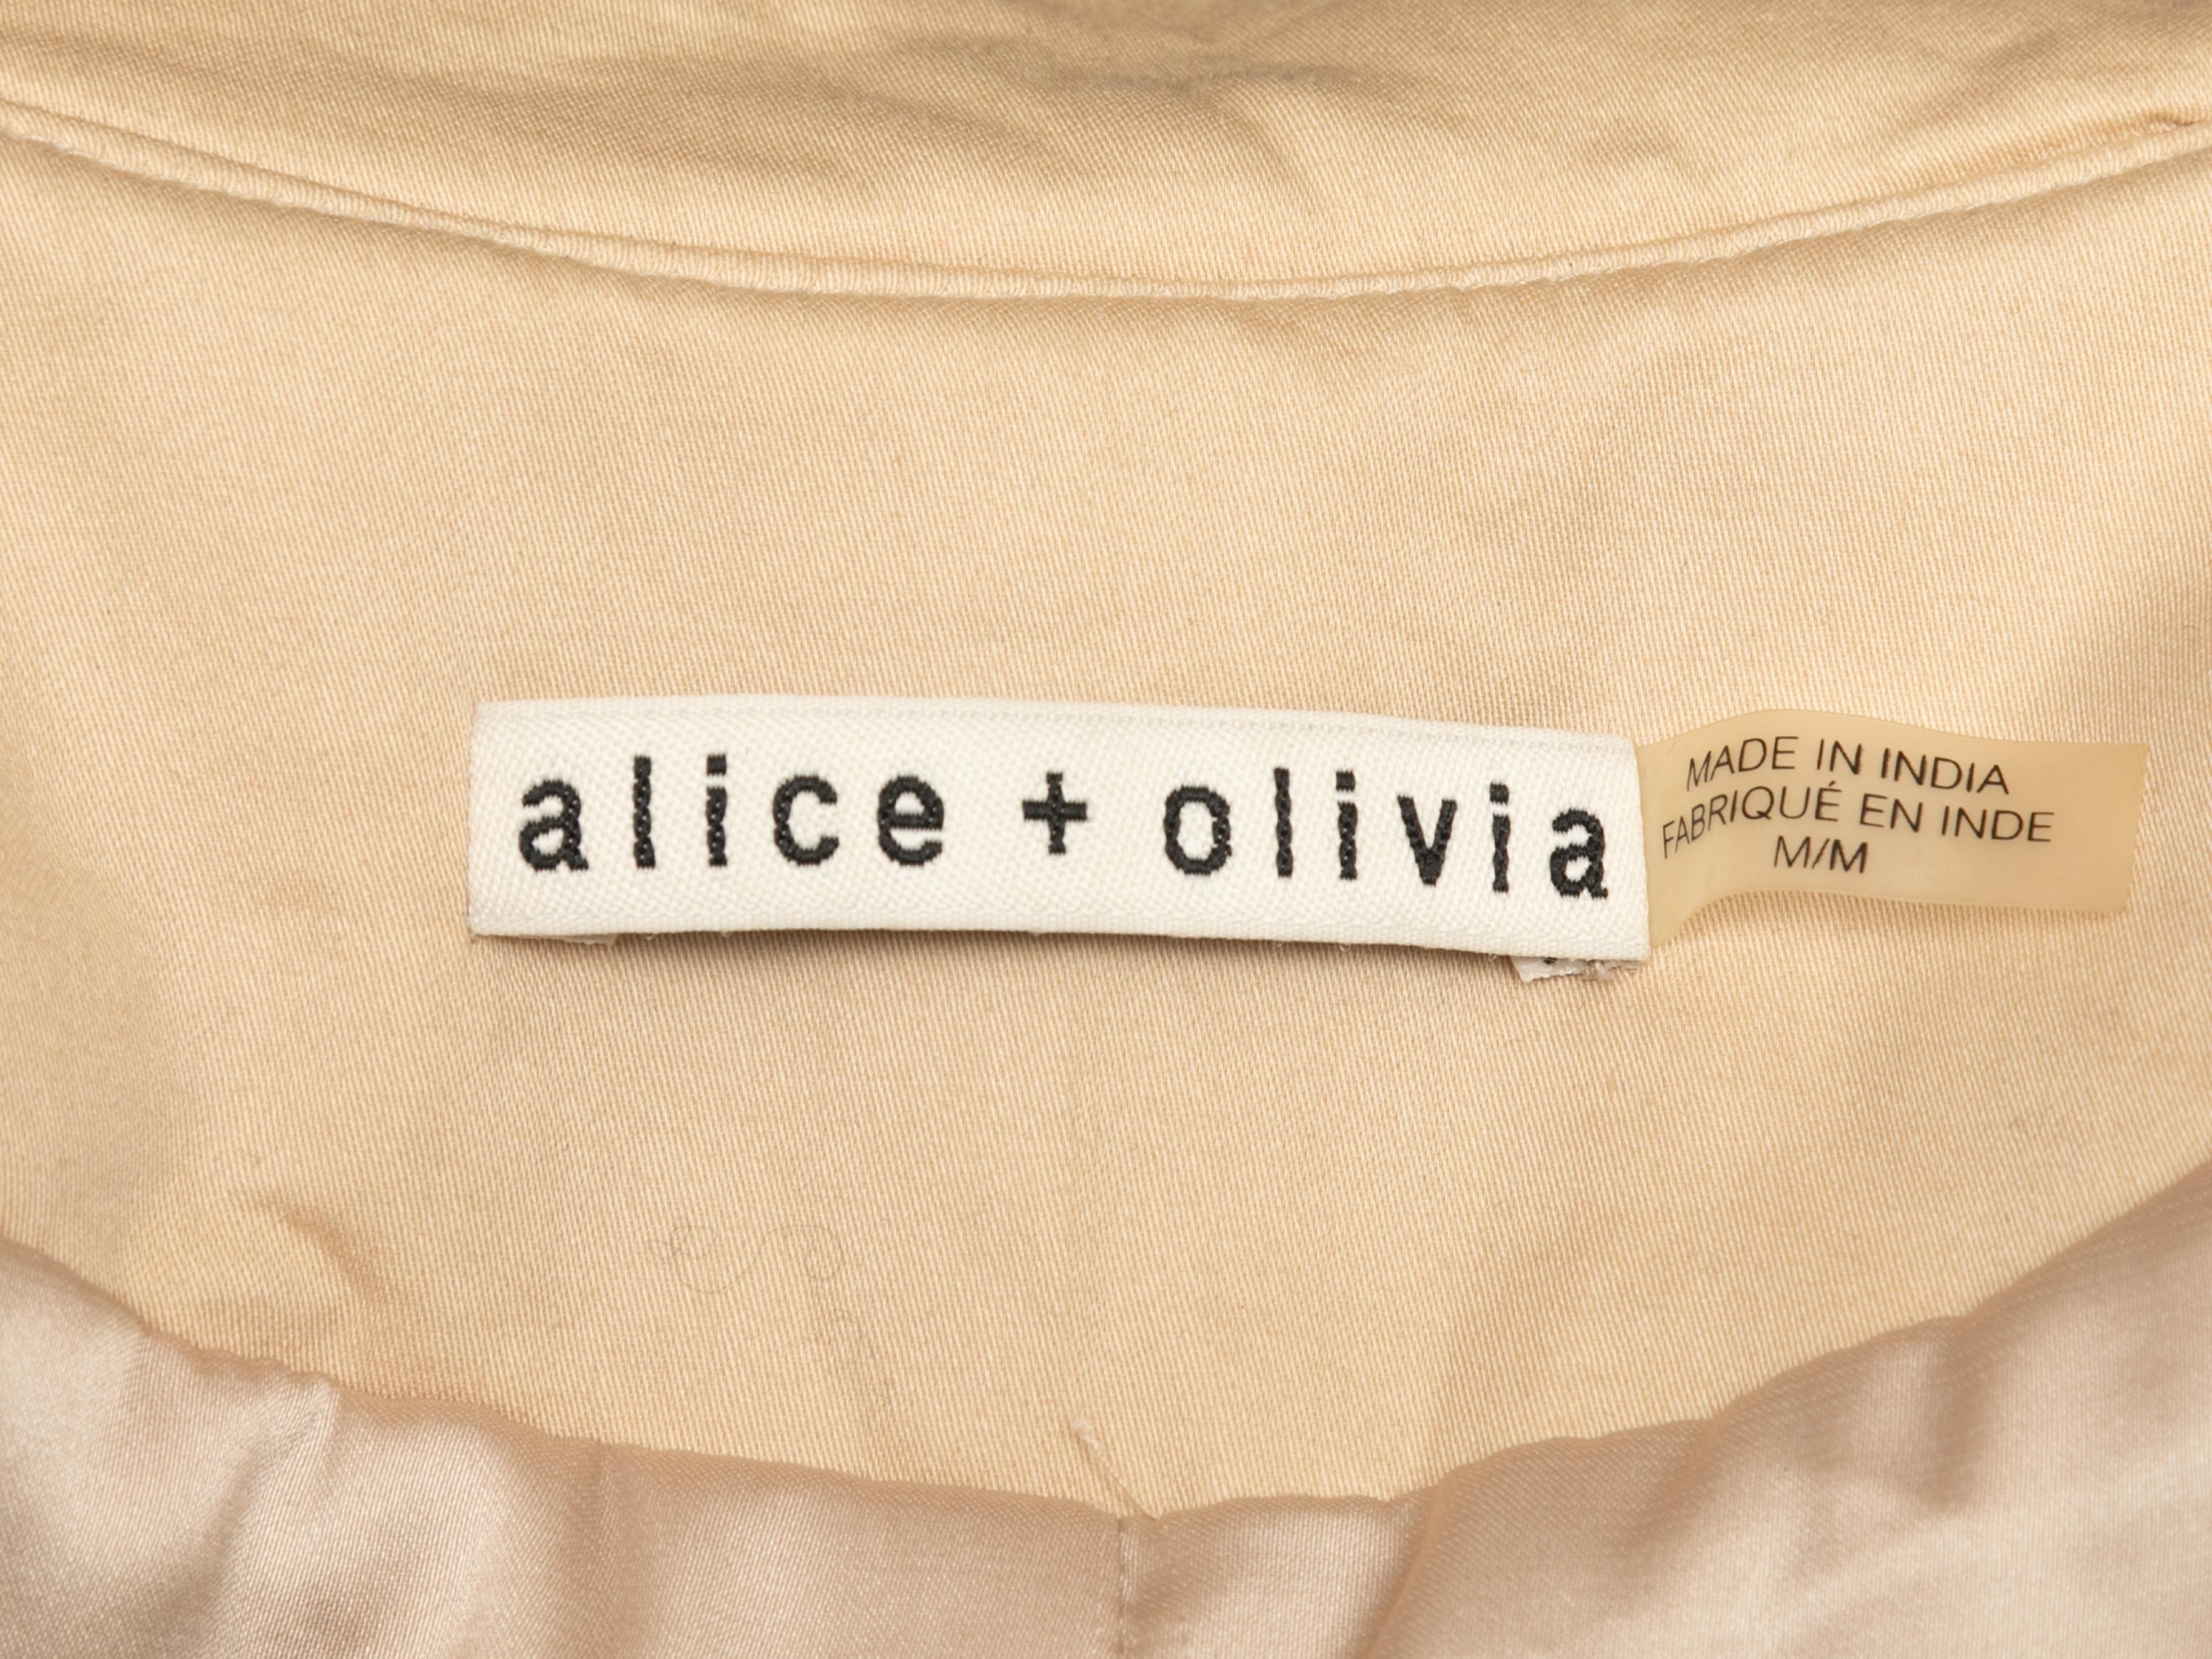 Tan and multicolor embroidered and bead-embellished jacket by Alice + Olivia. Stand collar. Zip closure at center front. 32